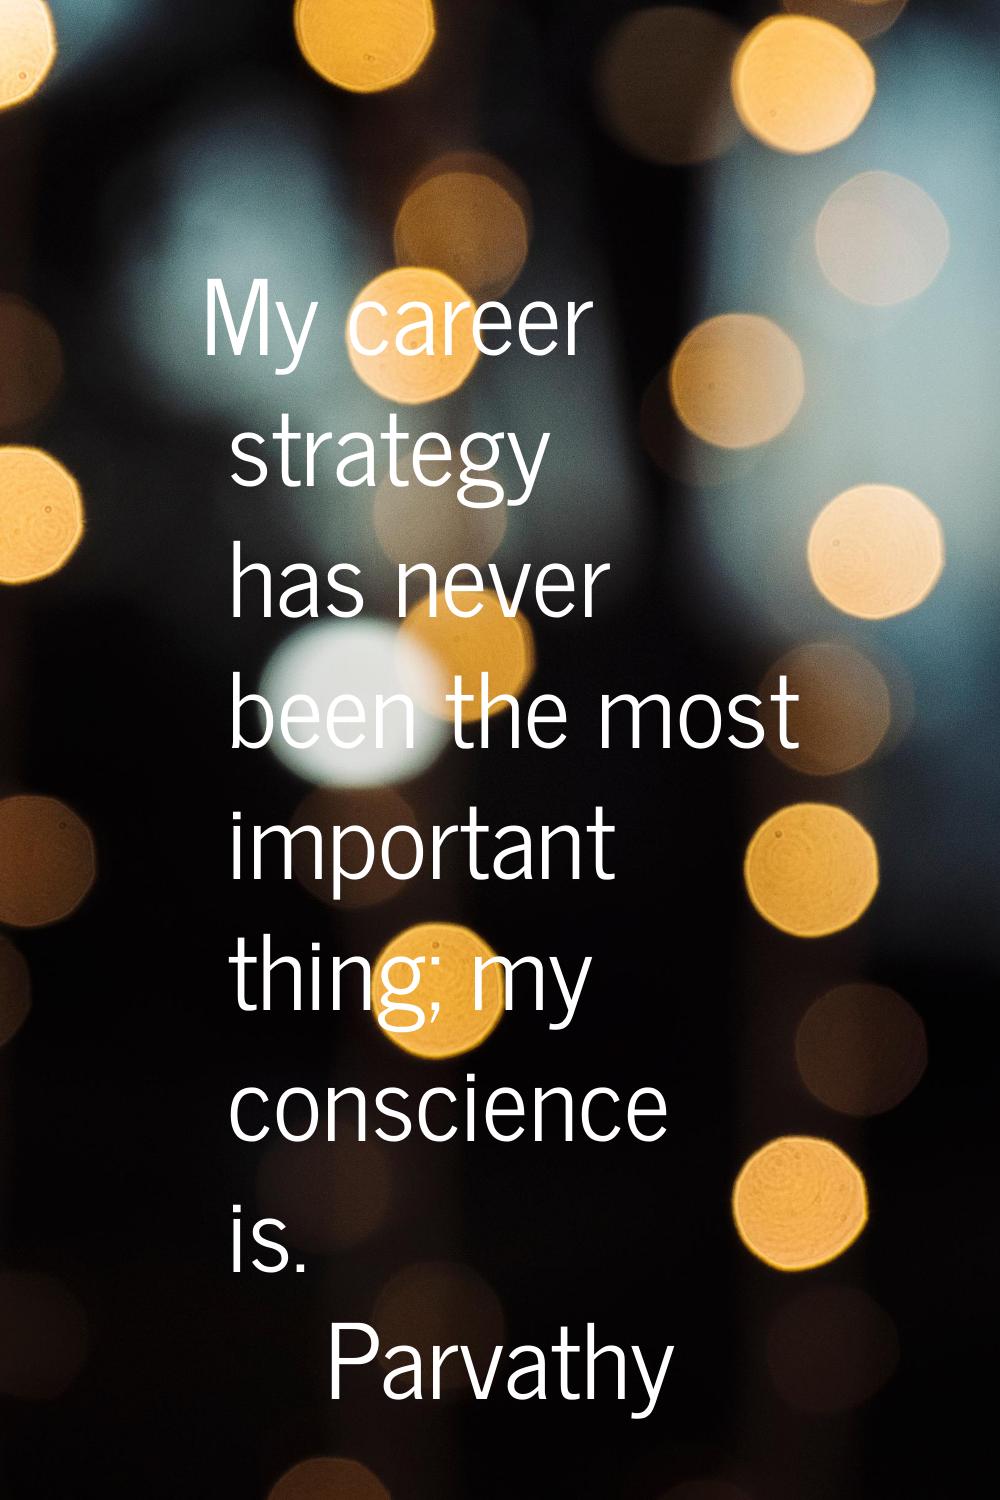 My career strategy has never been the most important thing; my conscience is.